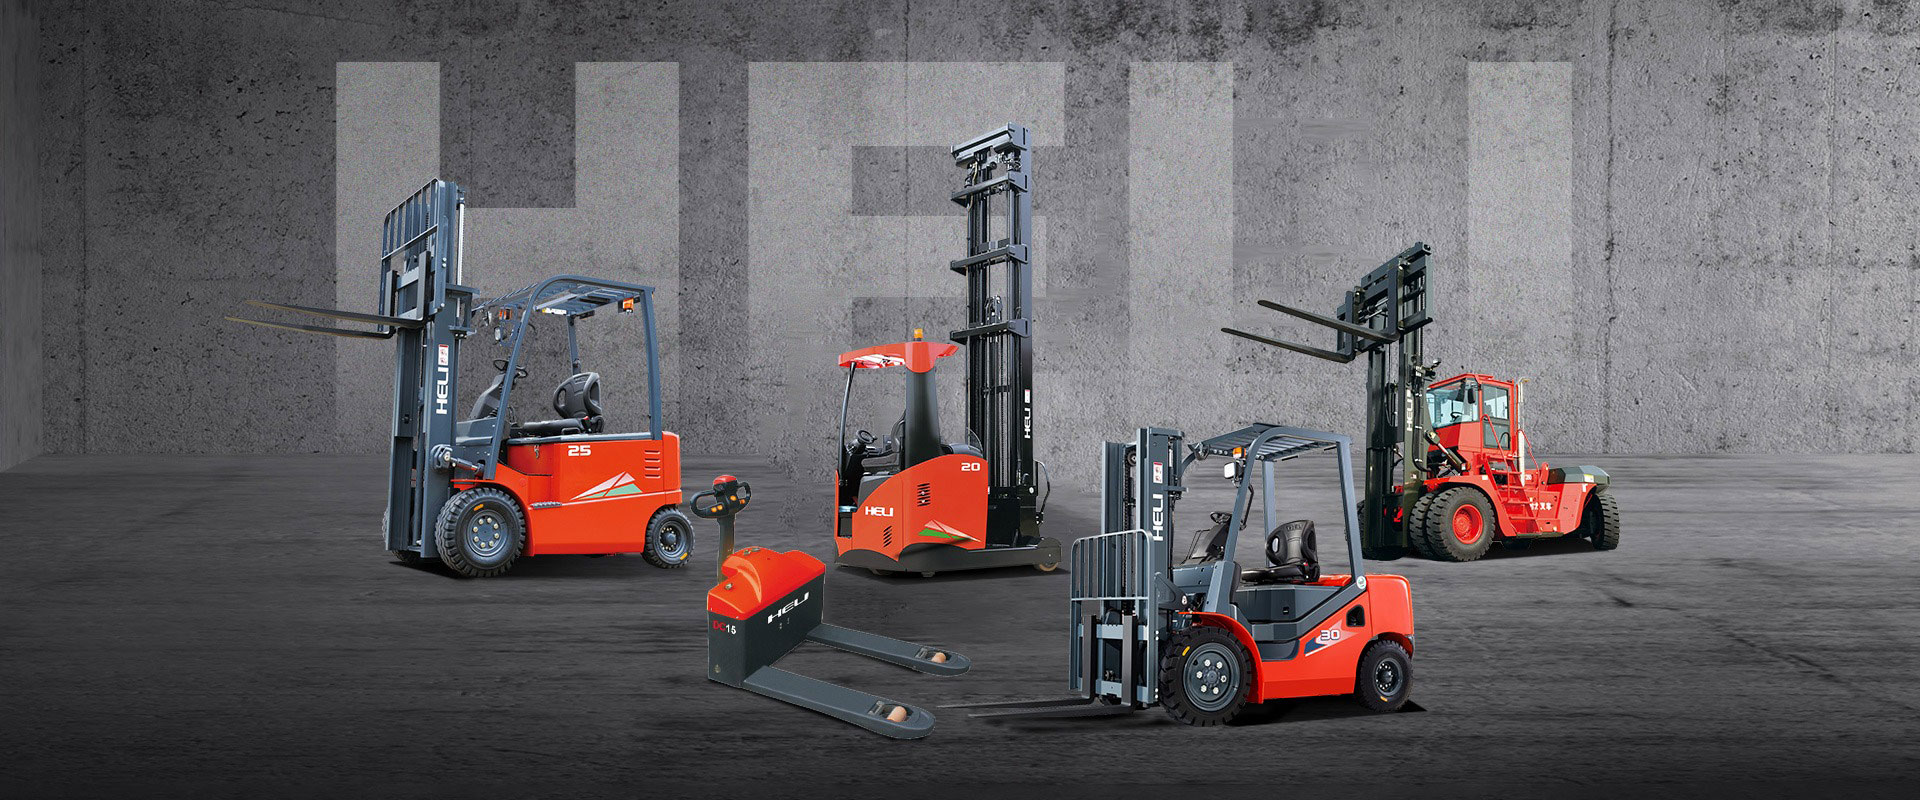 Why Choose a Heli Brand Forklift?